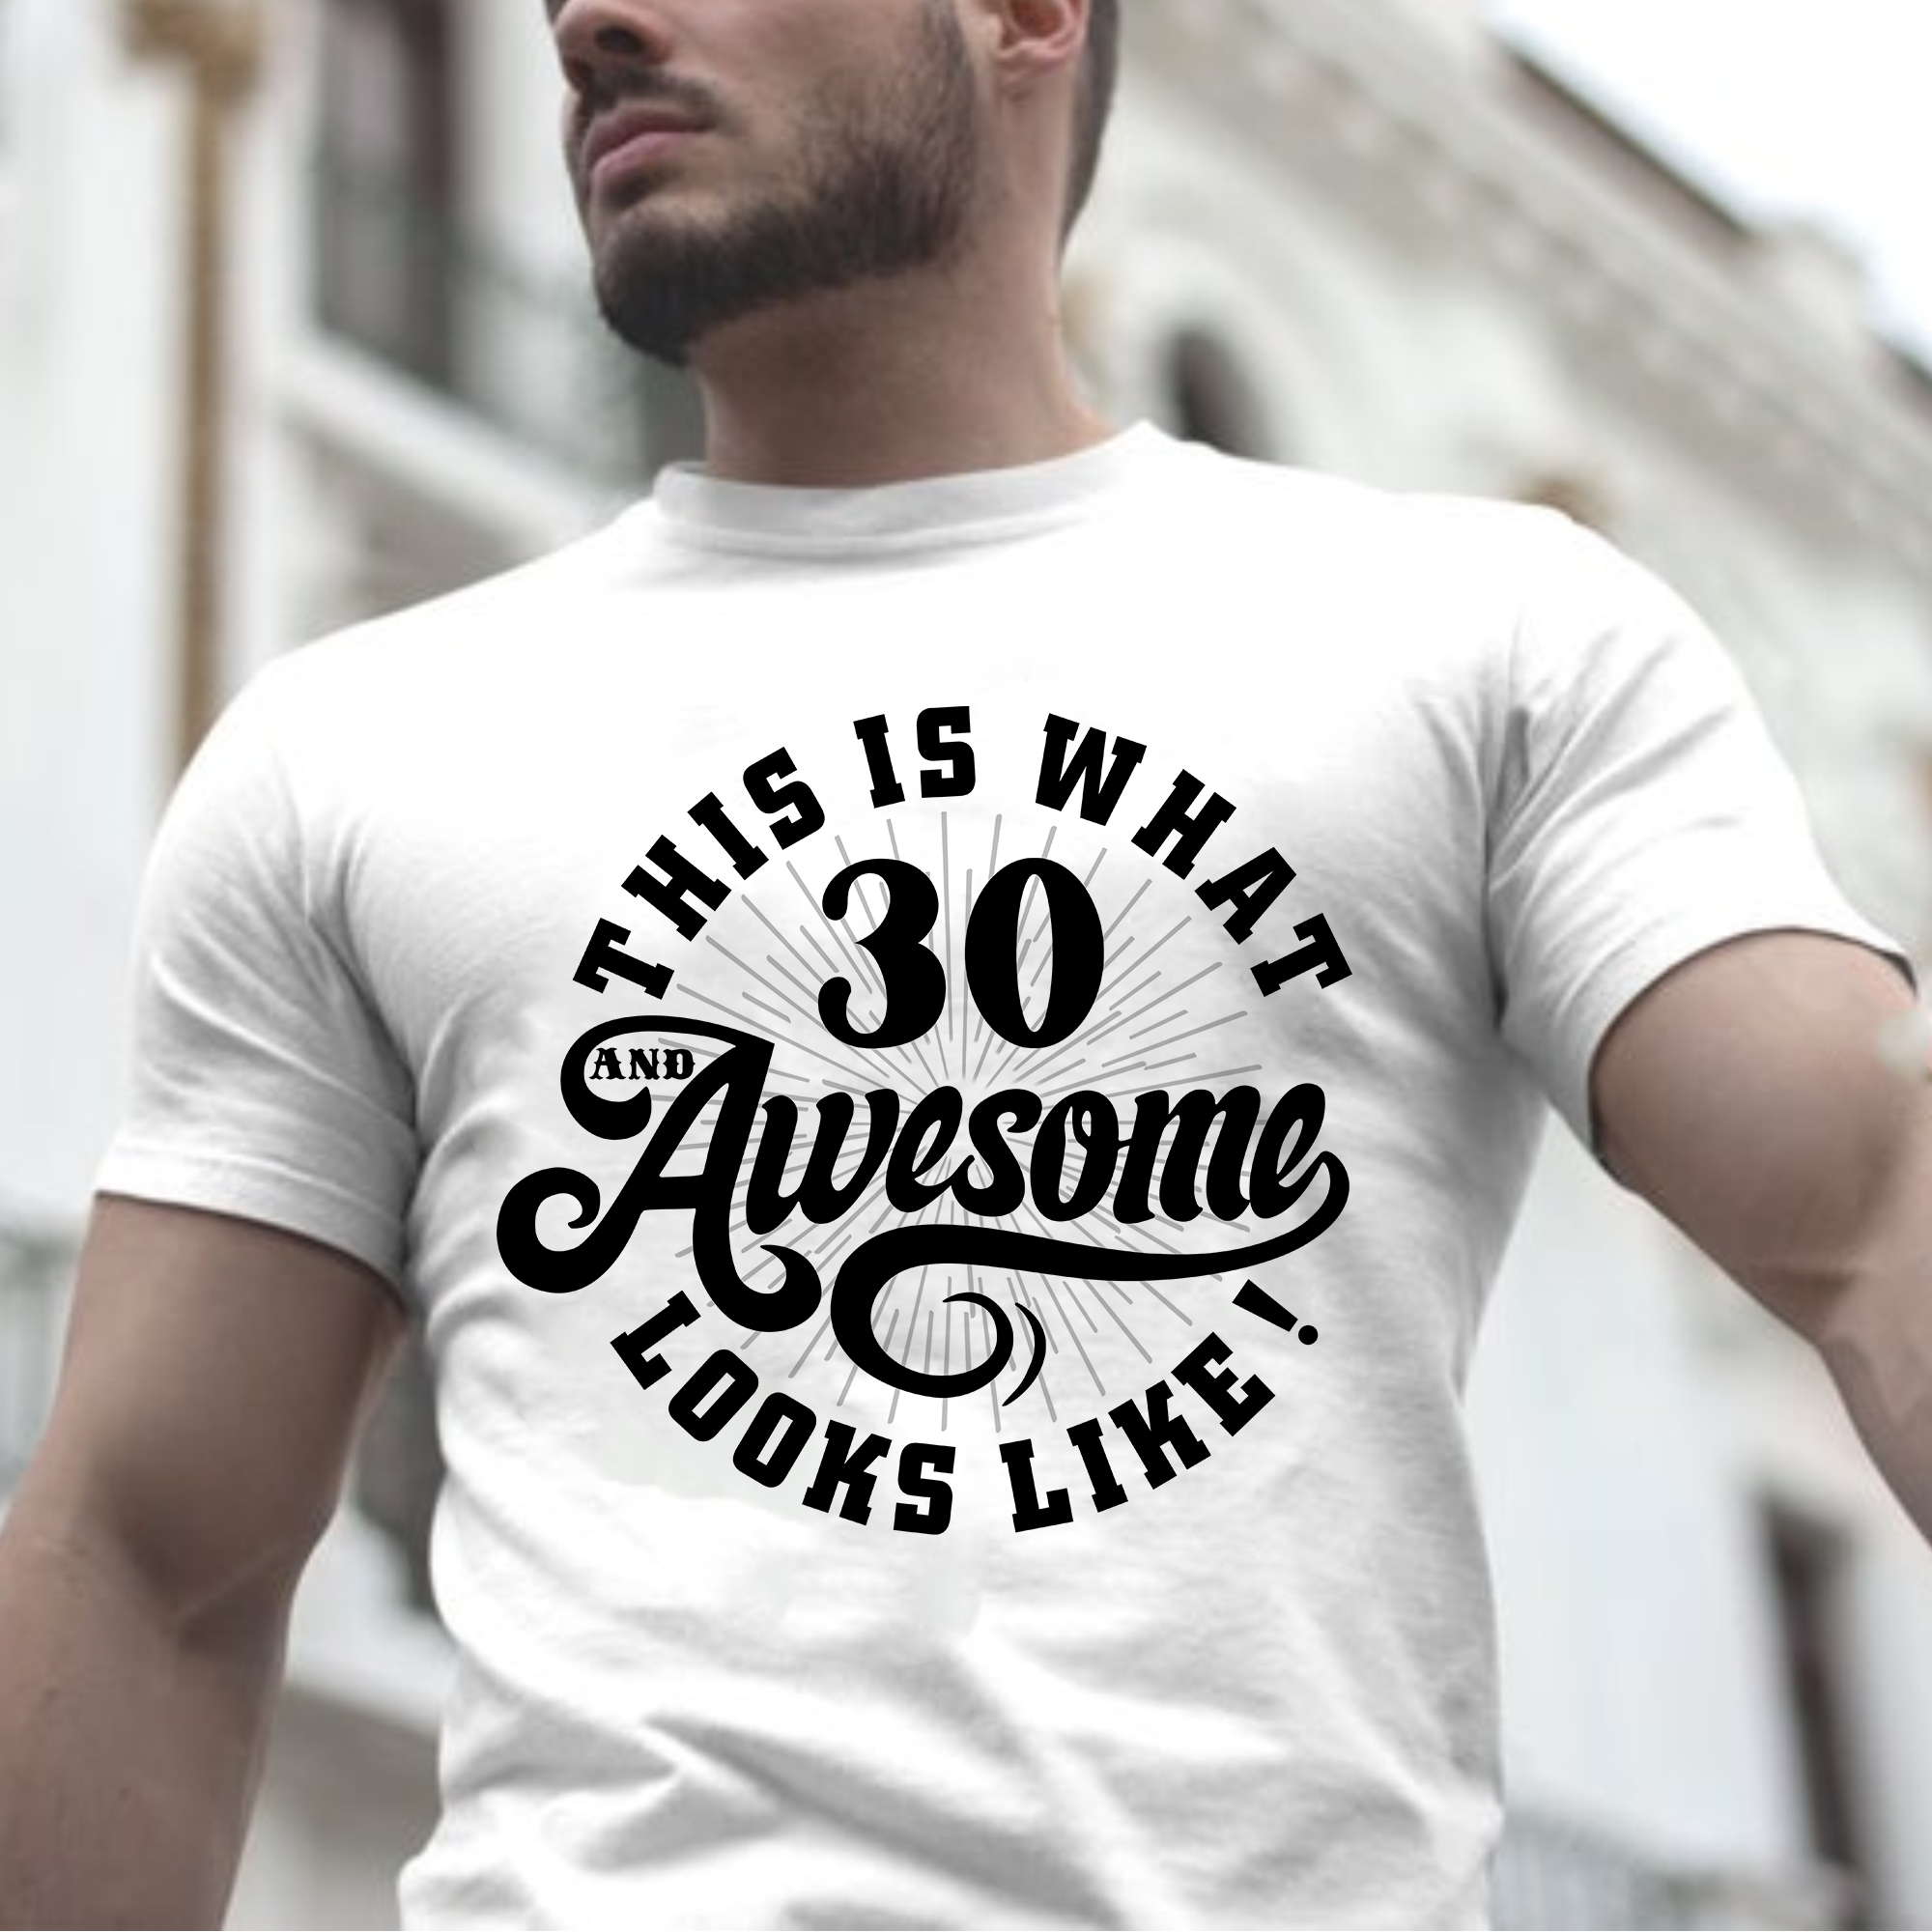 This Is What 30 Awesome Looks Like – Happy 30th Birthday Shirt